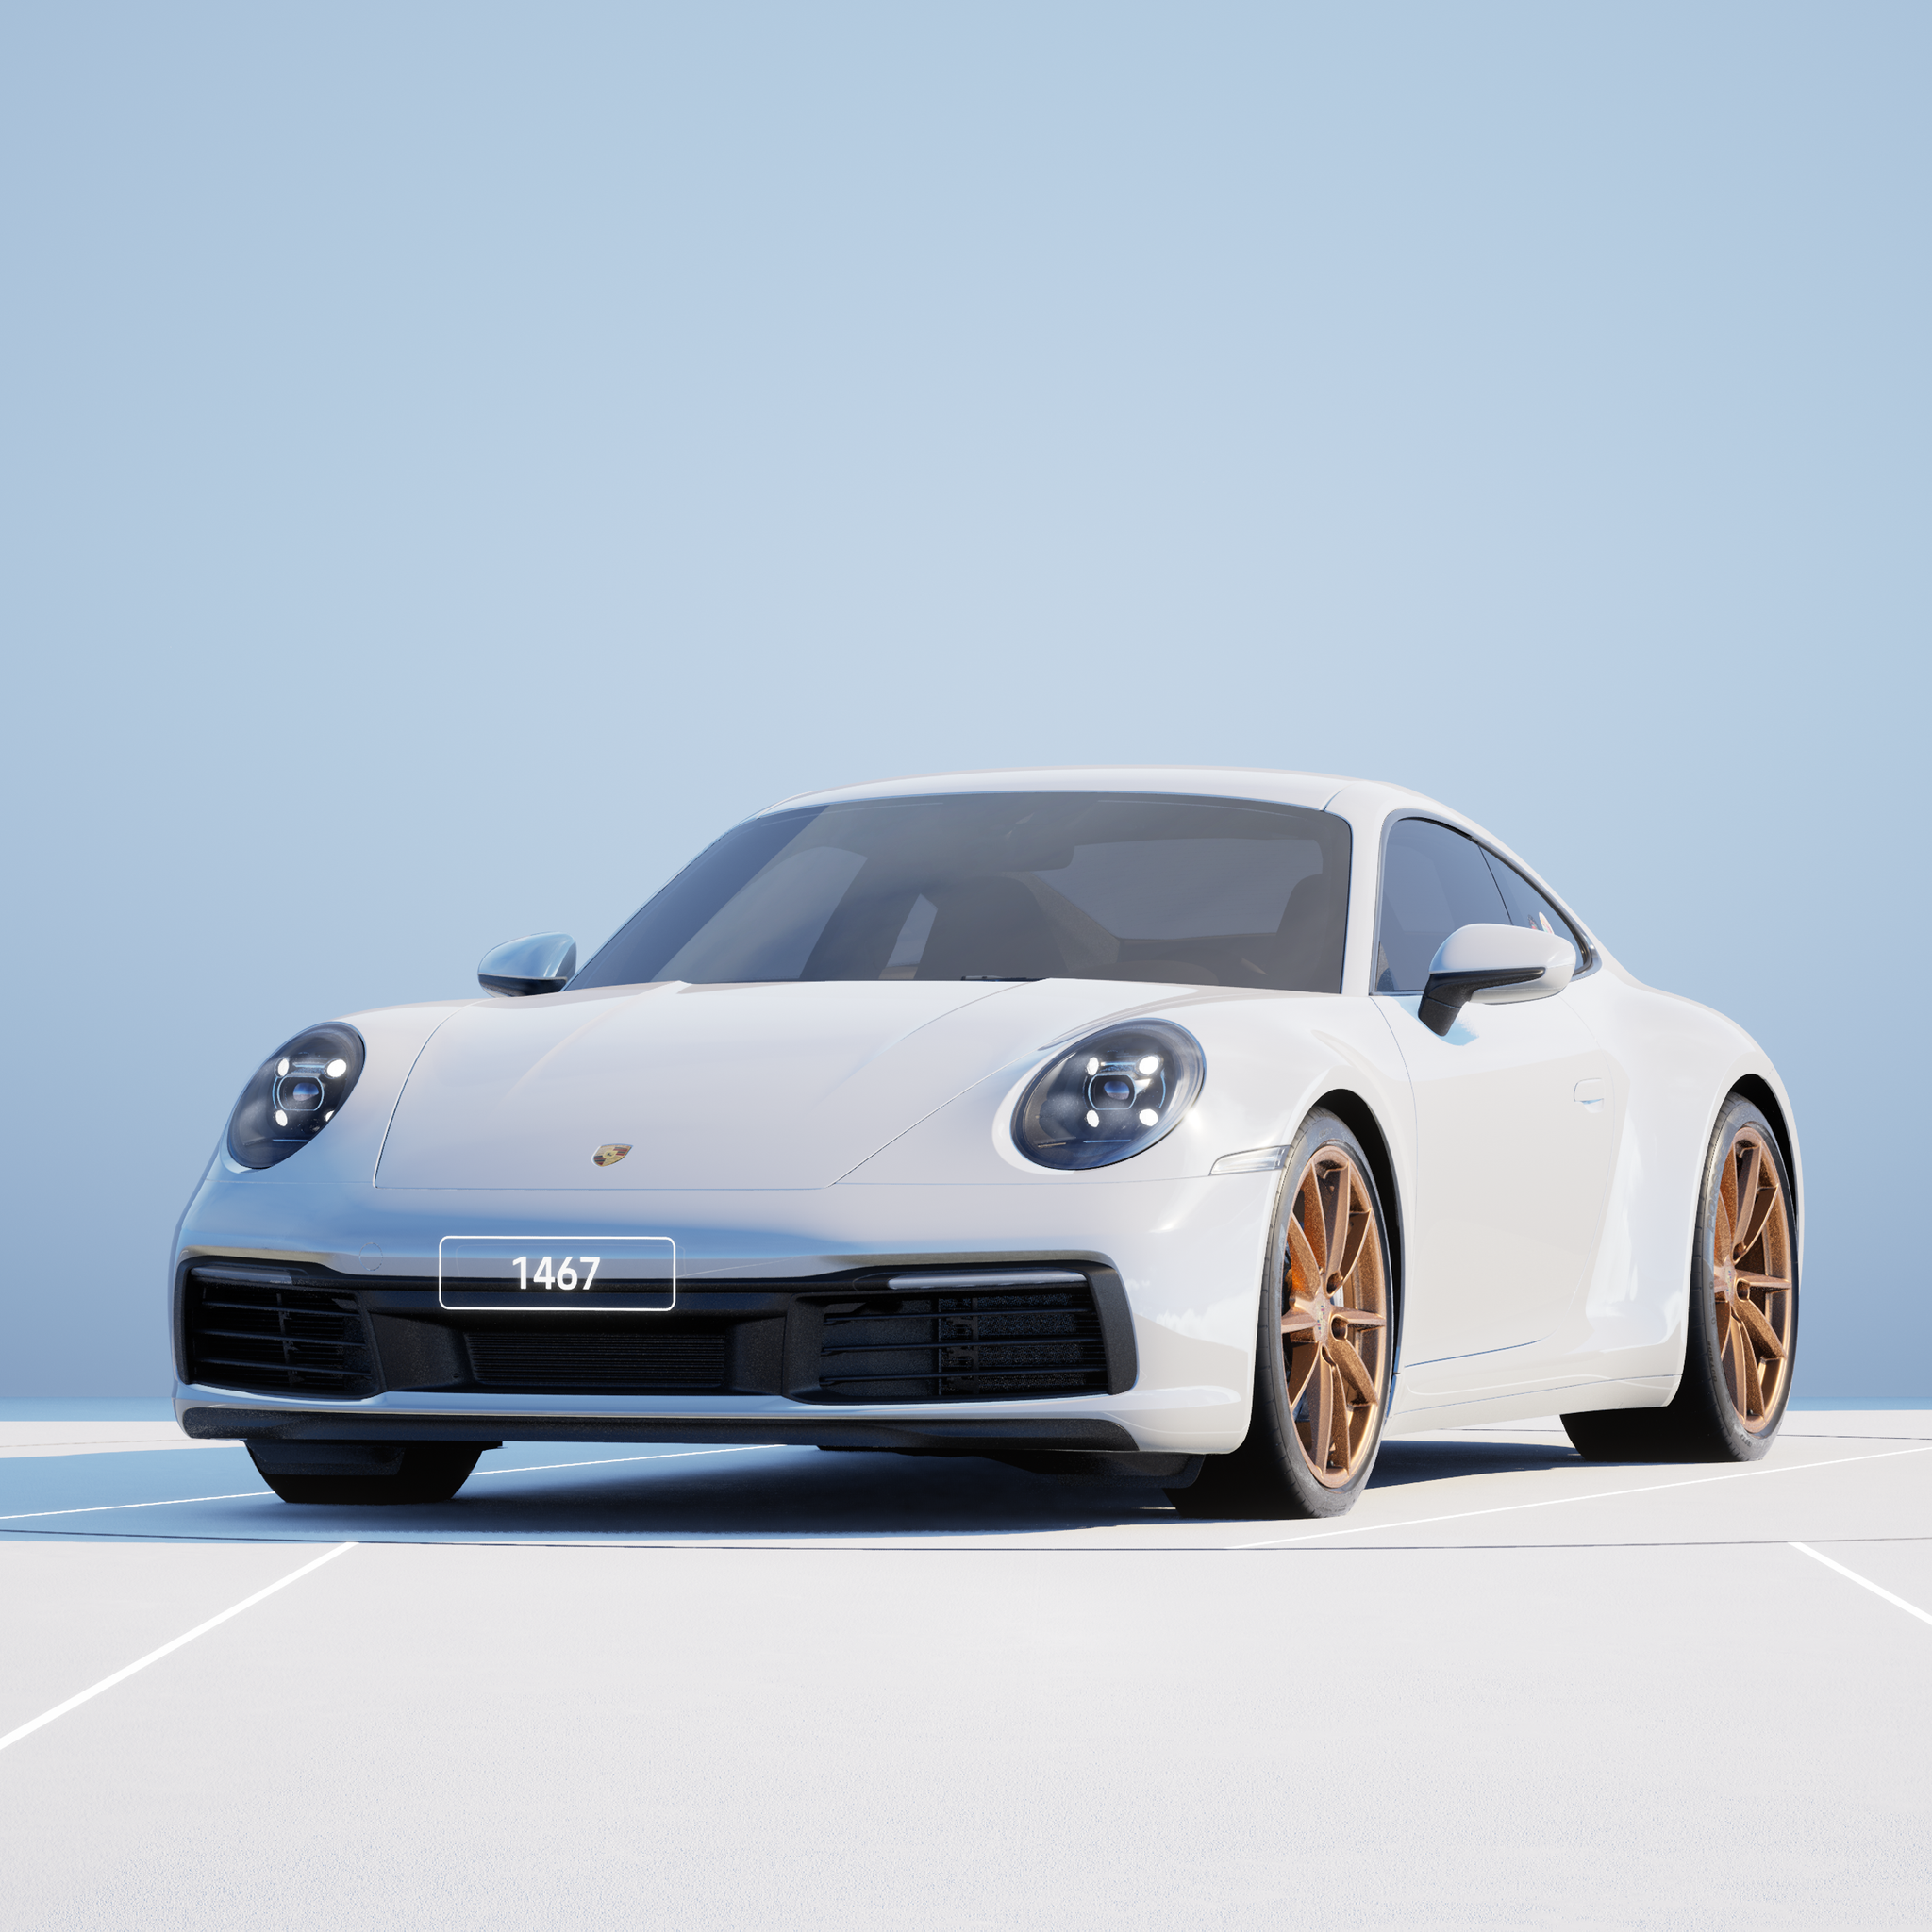 The PORSCHΞ 911 1467 image in phase